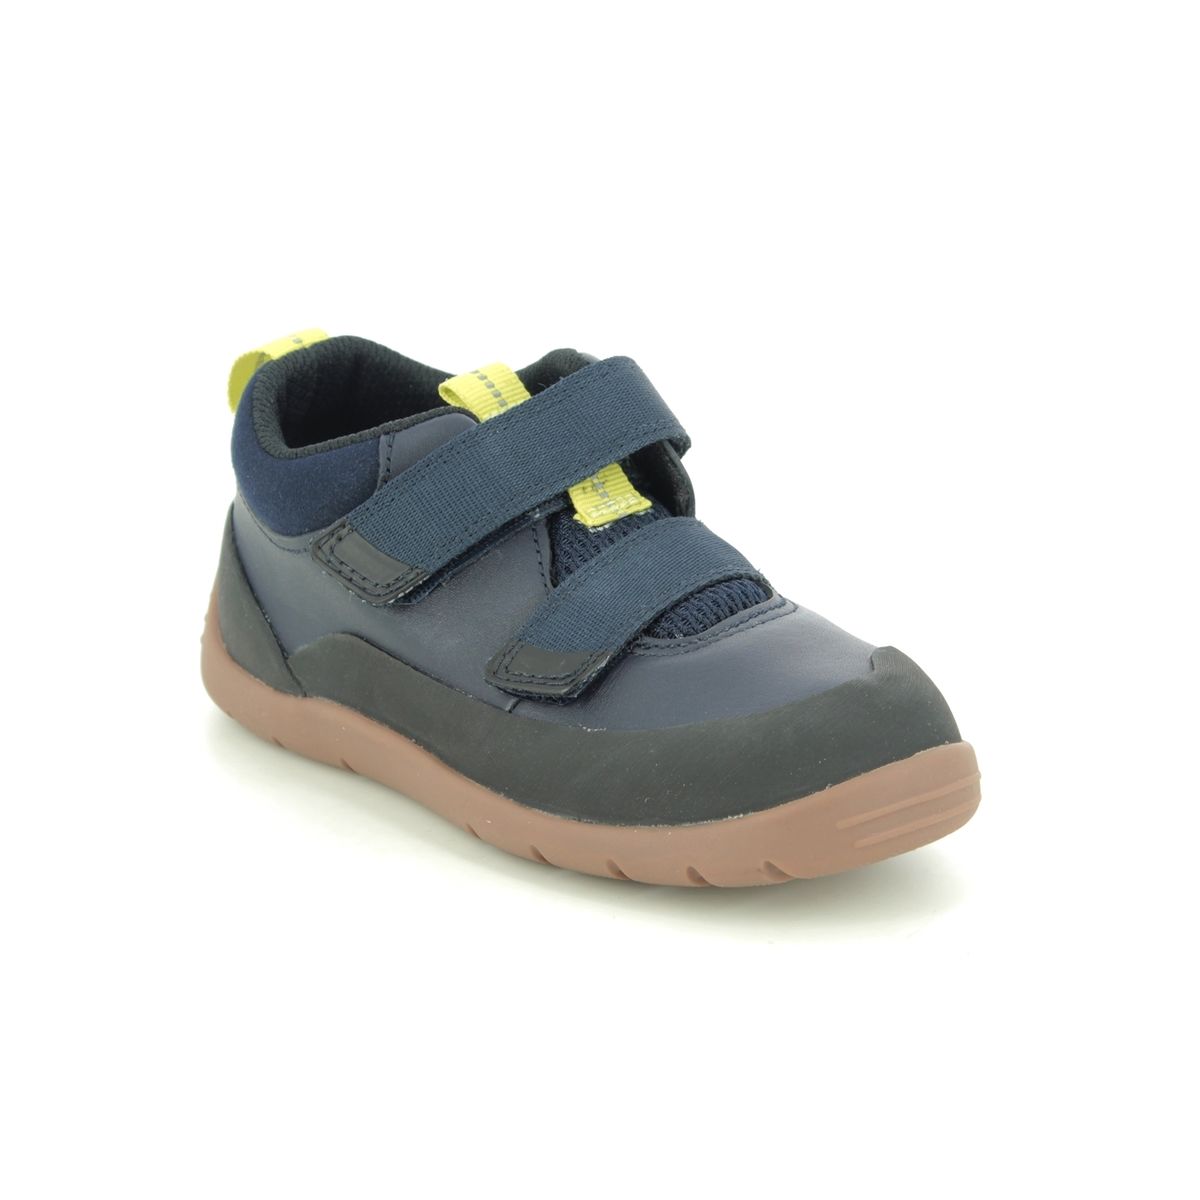 Clarks Play Hike T F Fit Navy Boys Shoes